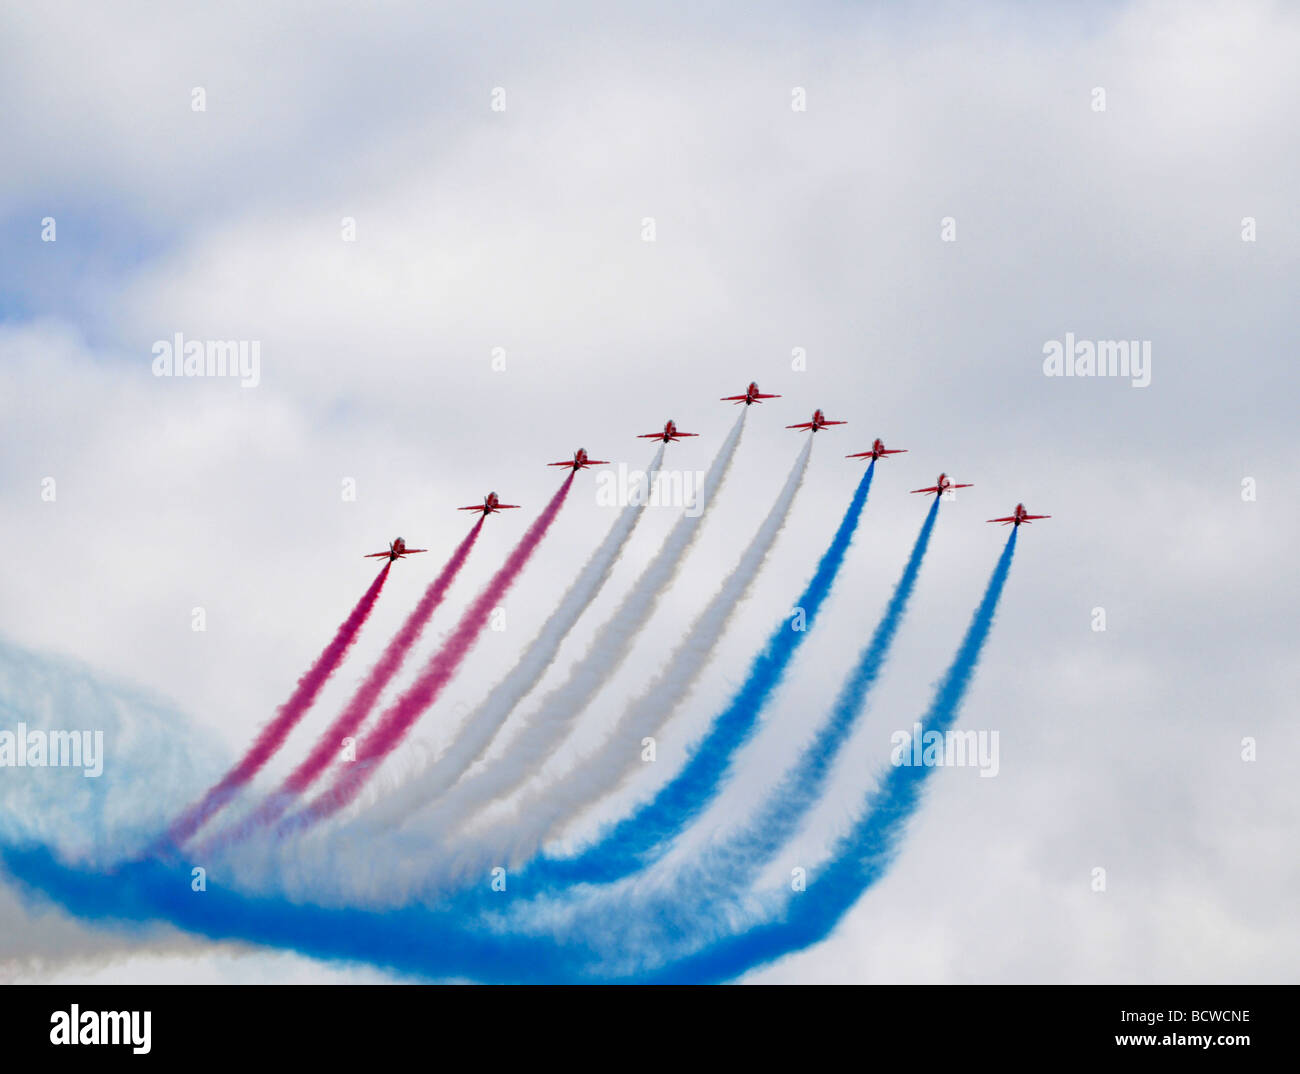 The red arrows are the world renowned aerobatic display team hires